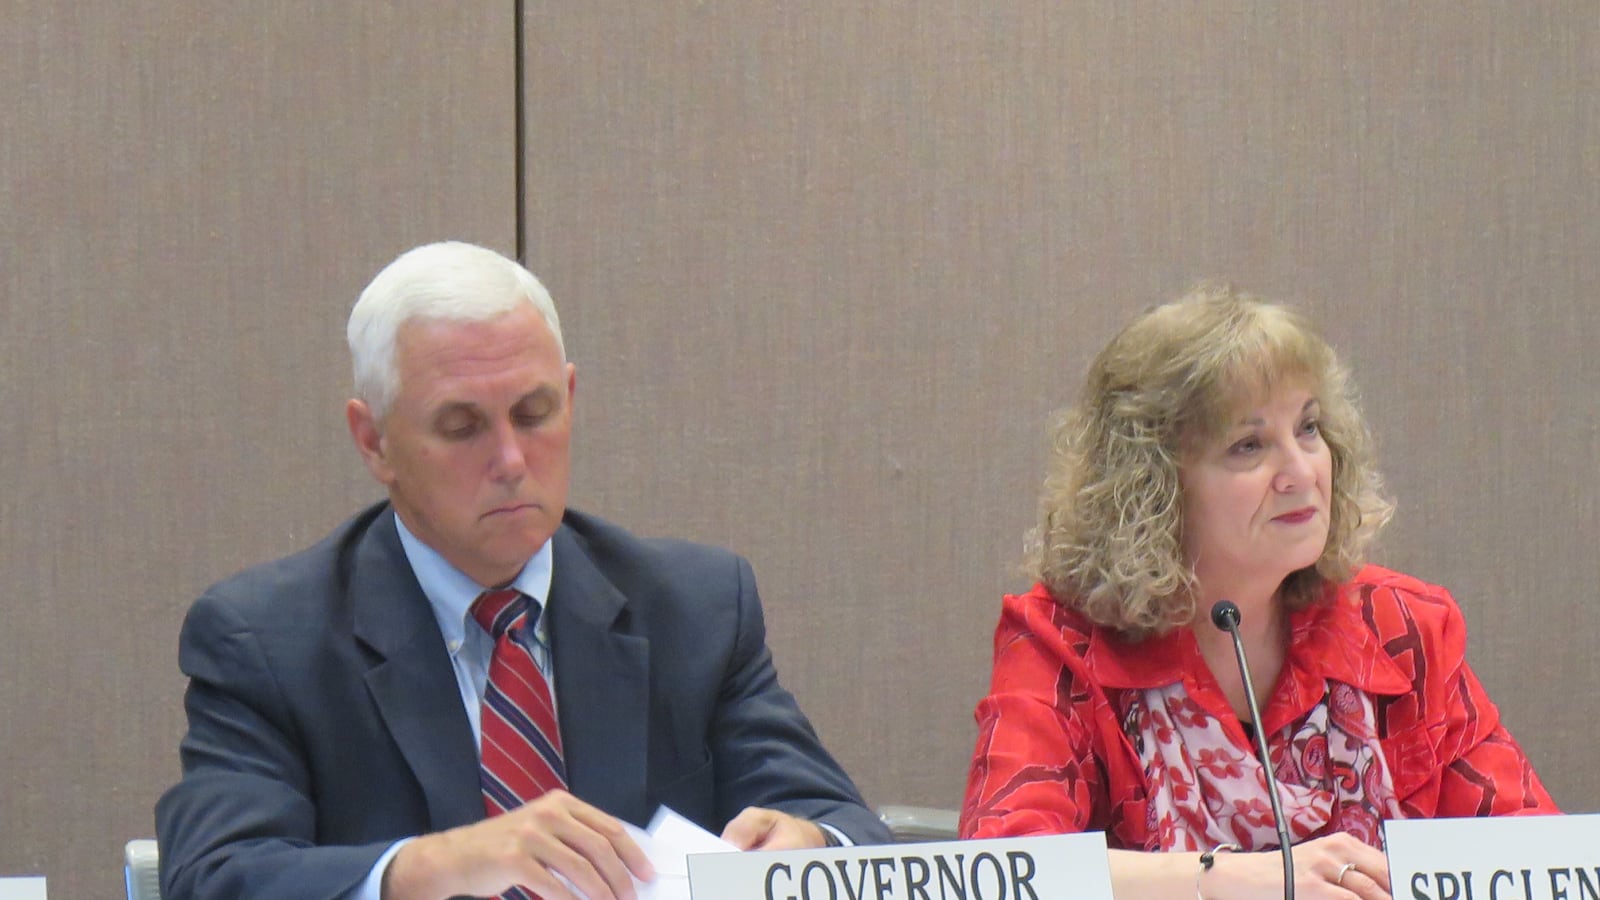 Gov. Mike Pence and state Superintendent Glenda Ritz battled over education policy for years, but they agreed on dumping Common Core and PARCC.